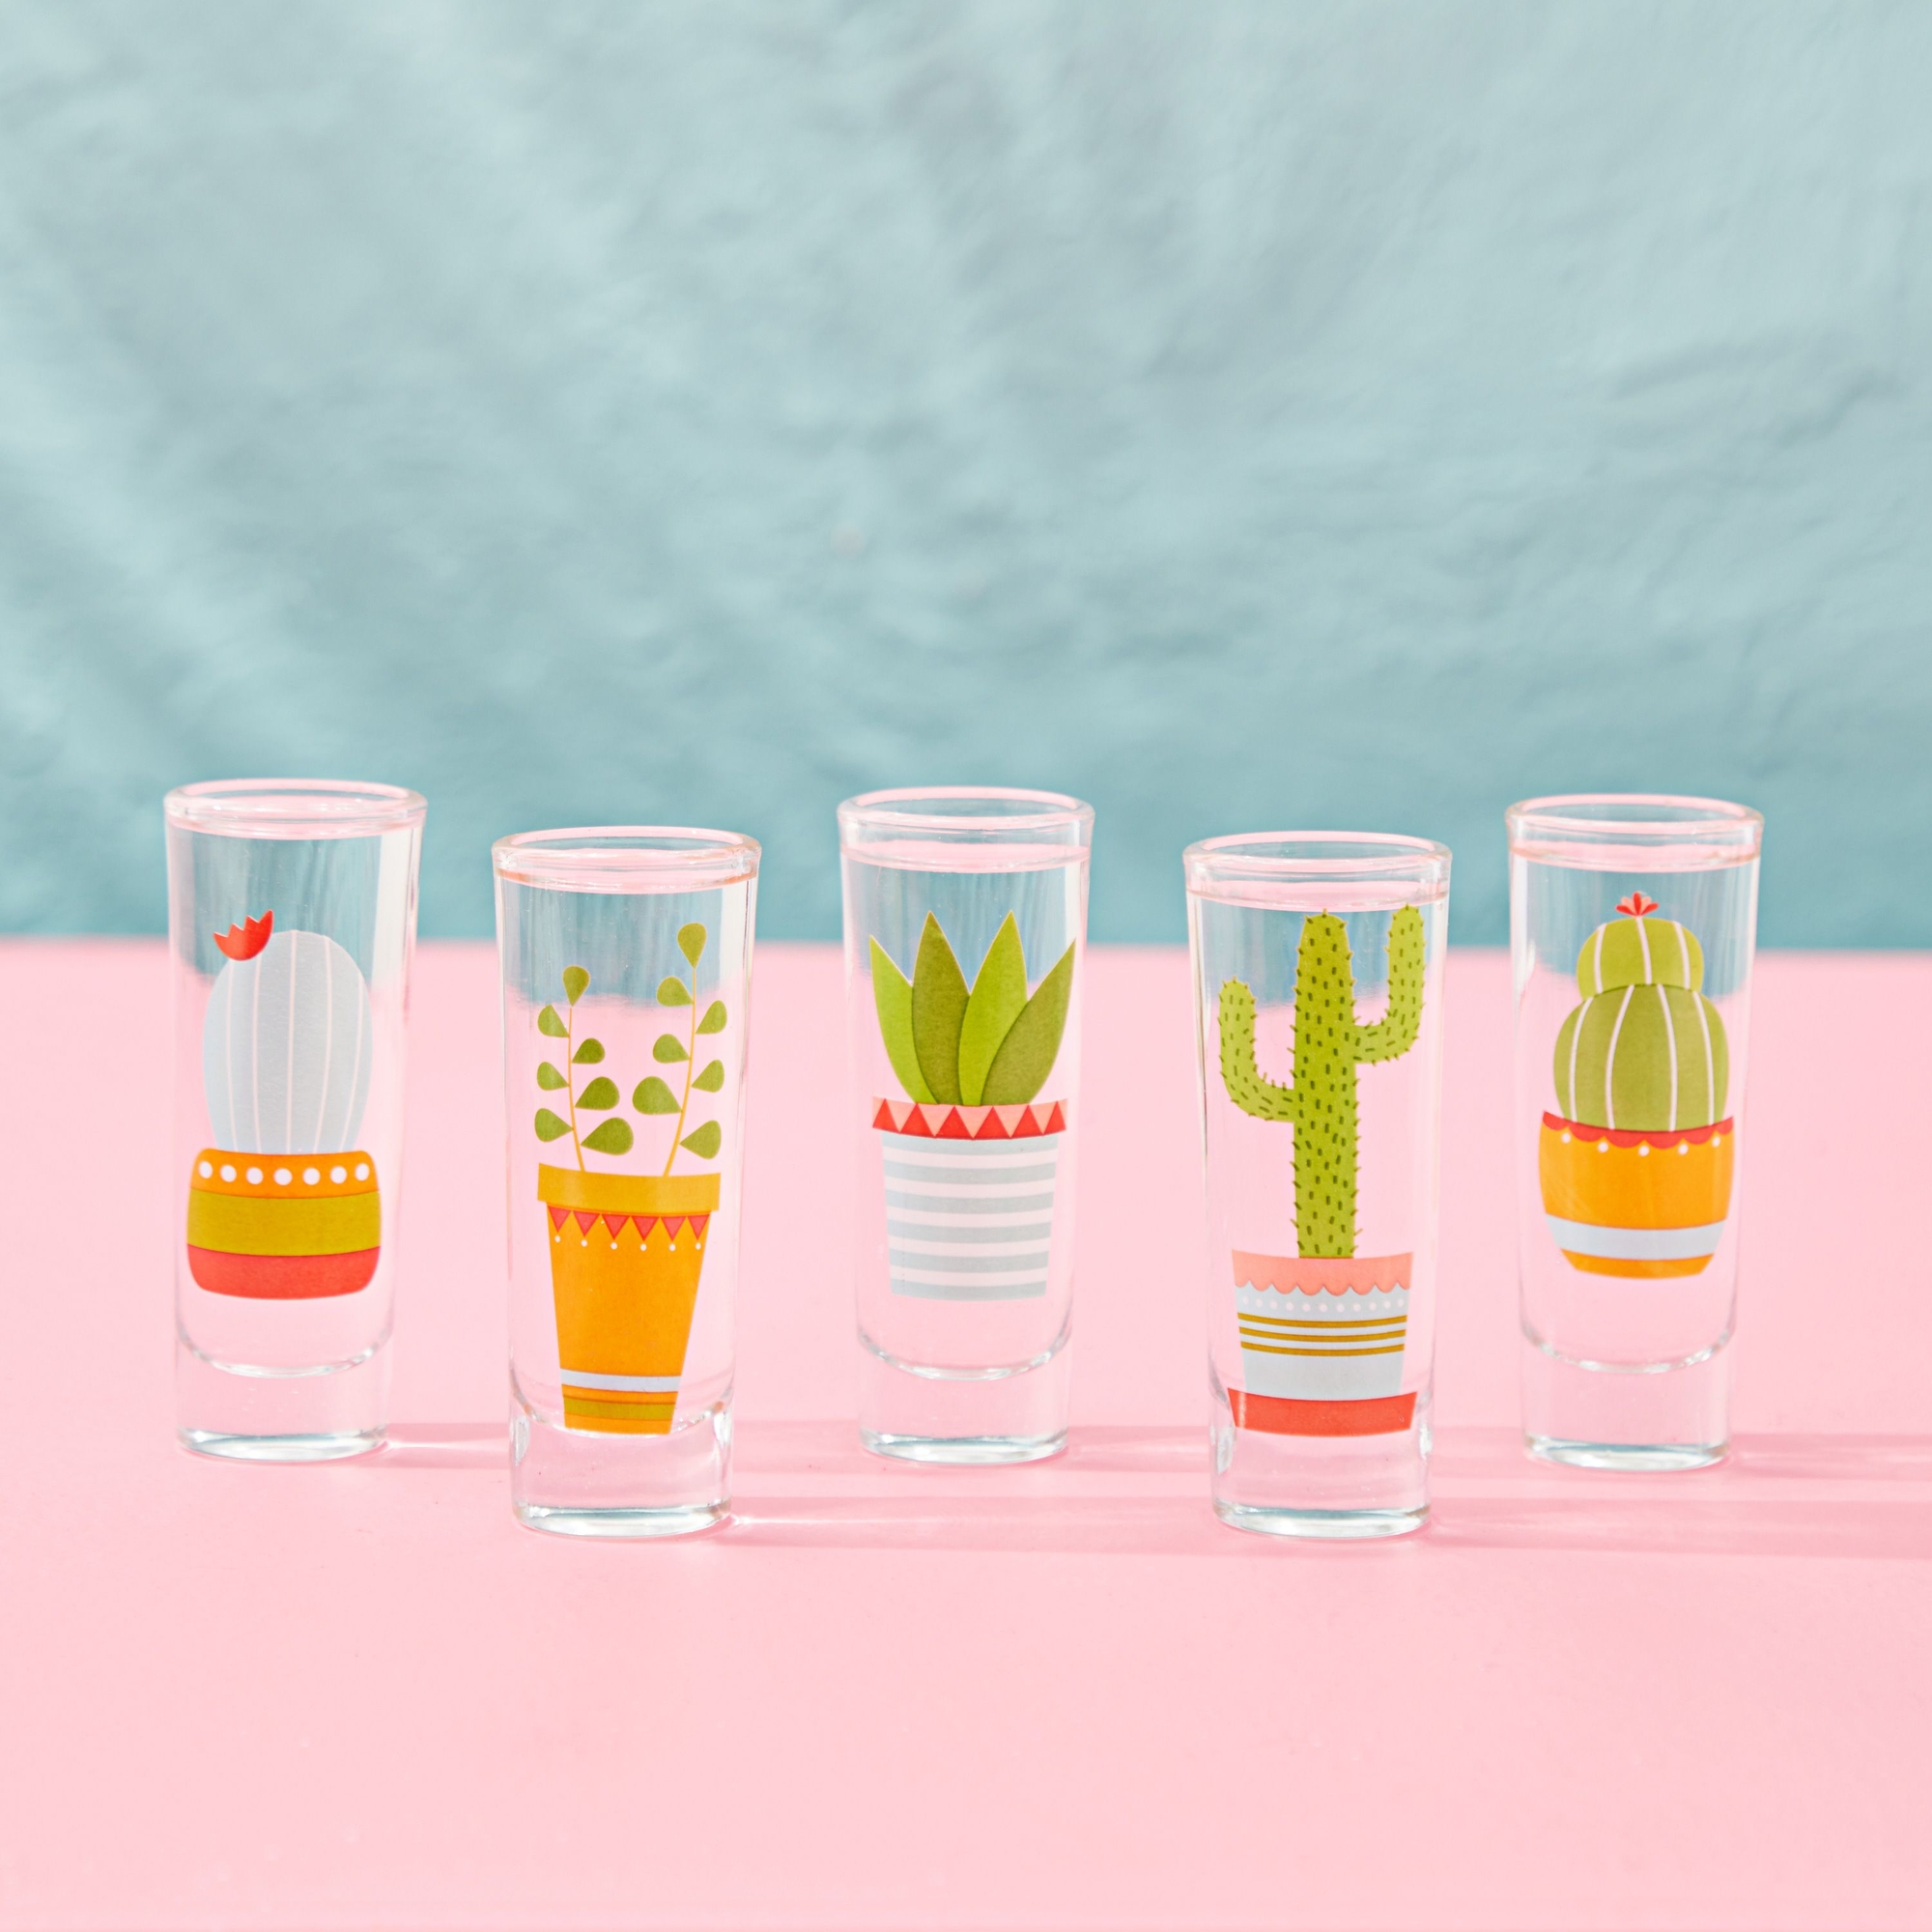 5 Pack Shot Glasses Set with Cactus Designs for Bachelorette, Fiesta Supplies, Western-Themed Party, Round, Decorative Shot Glasses with Heavy Base for Tequila, Whiskey, Vodka (2 oz) - image 5 of 10